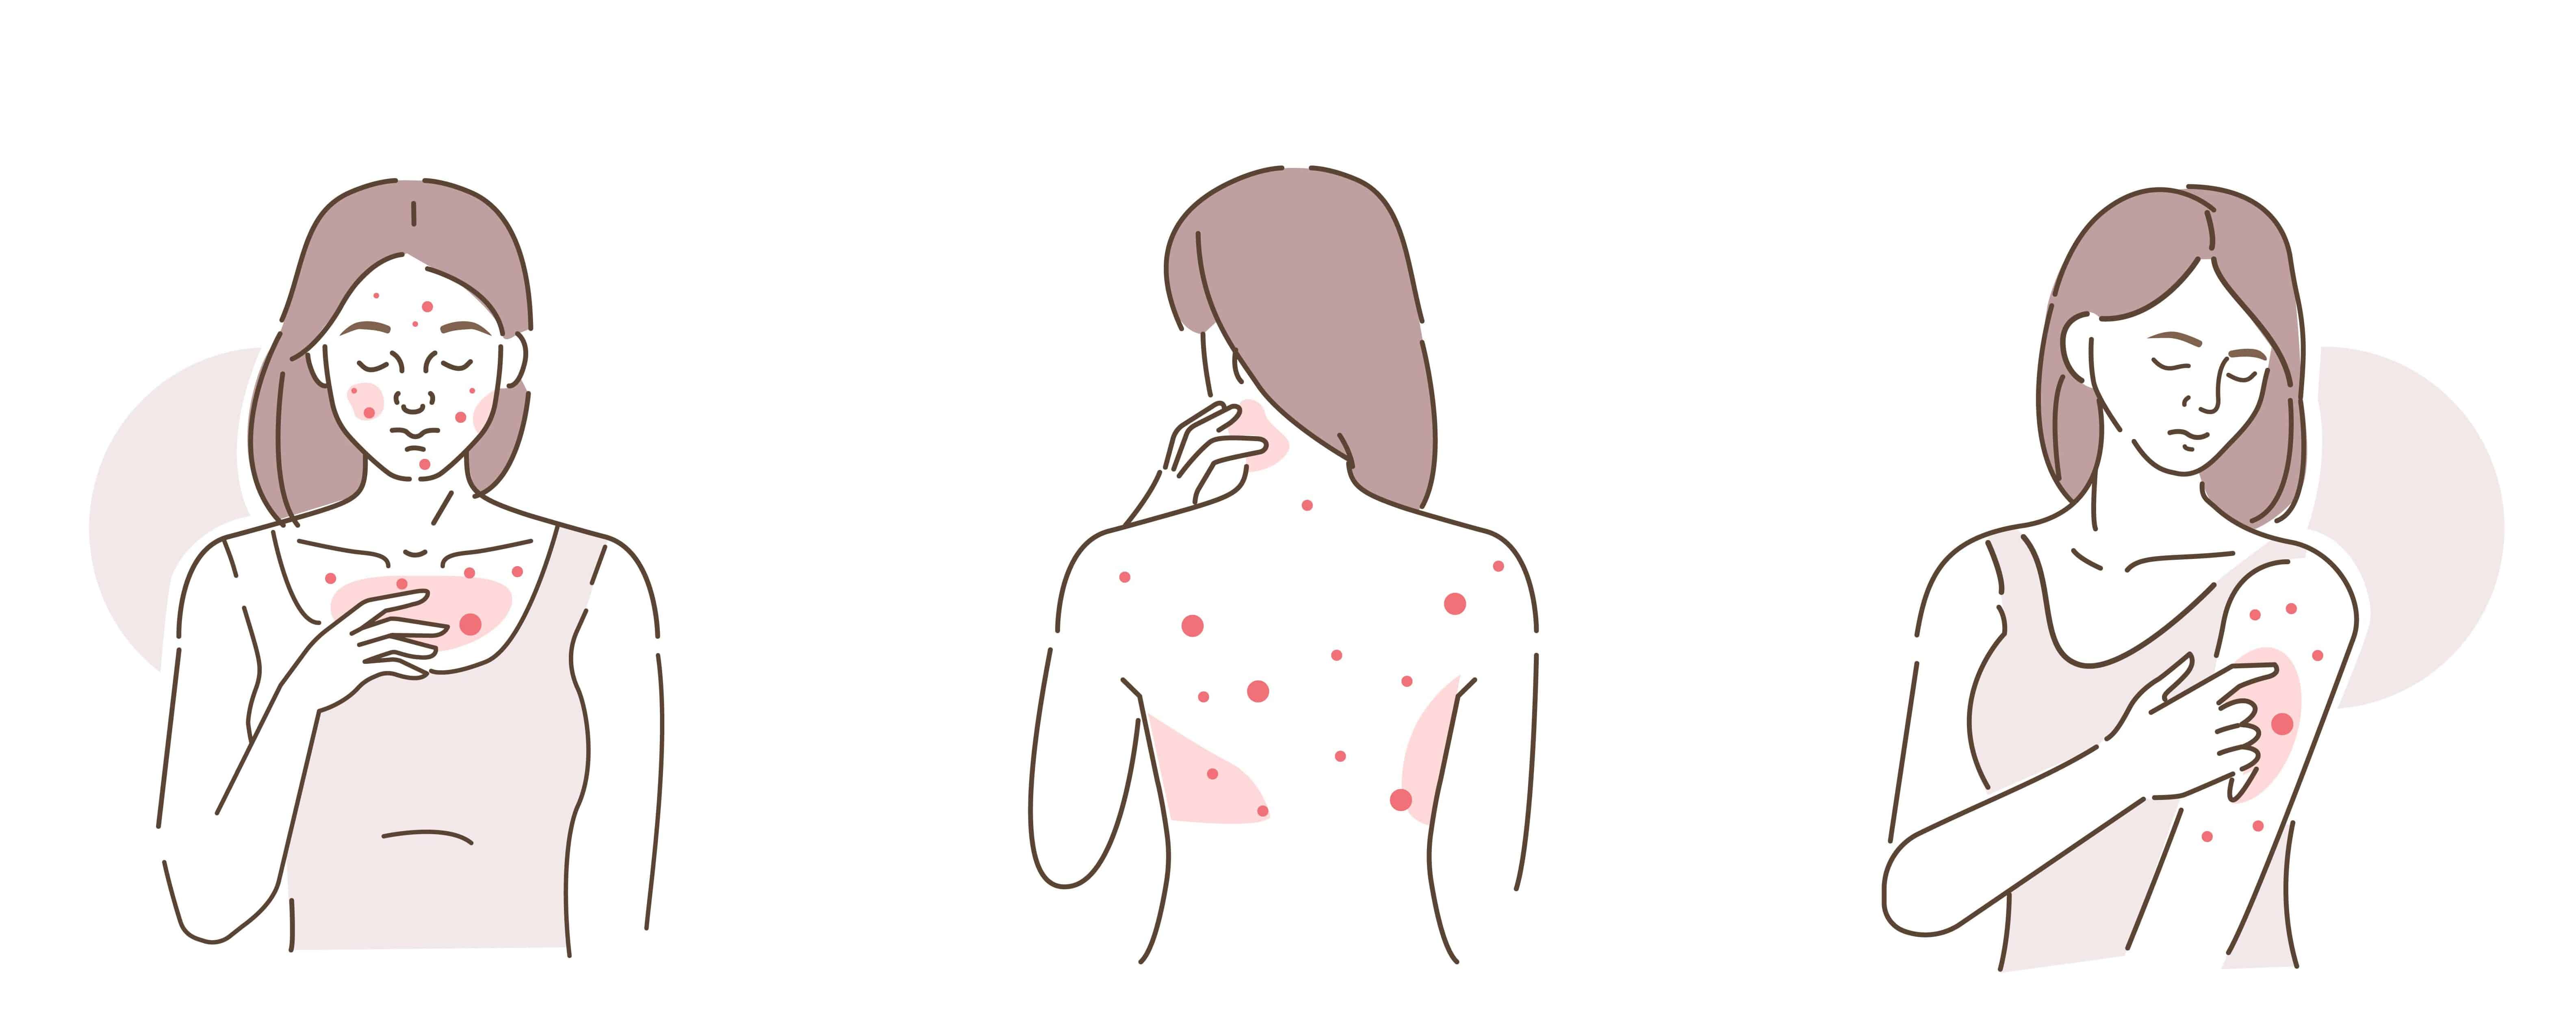 illustration of a lady who has a severe bacne, arm and body acne